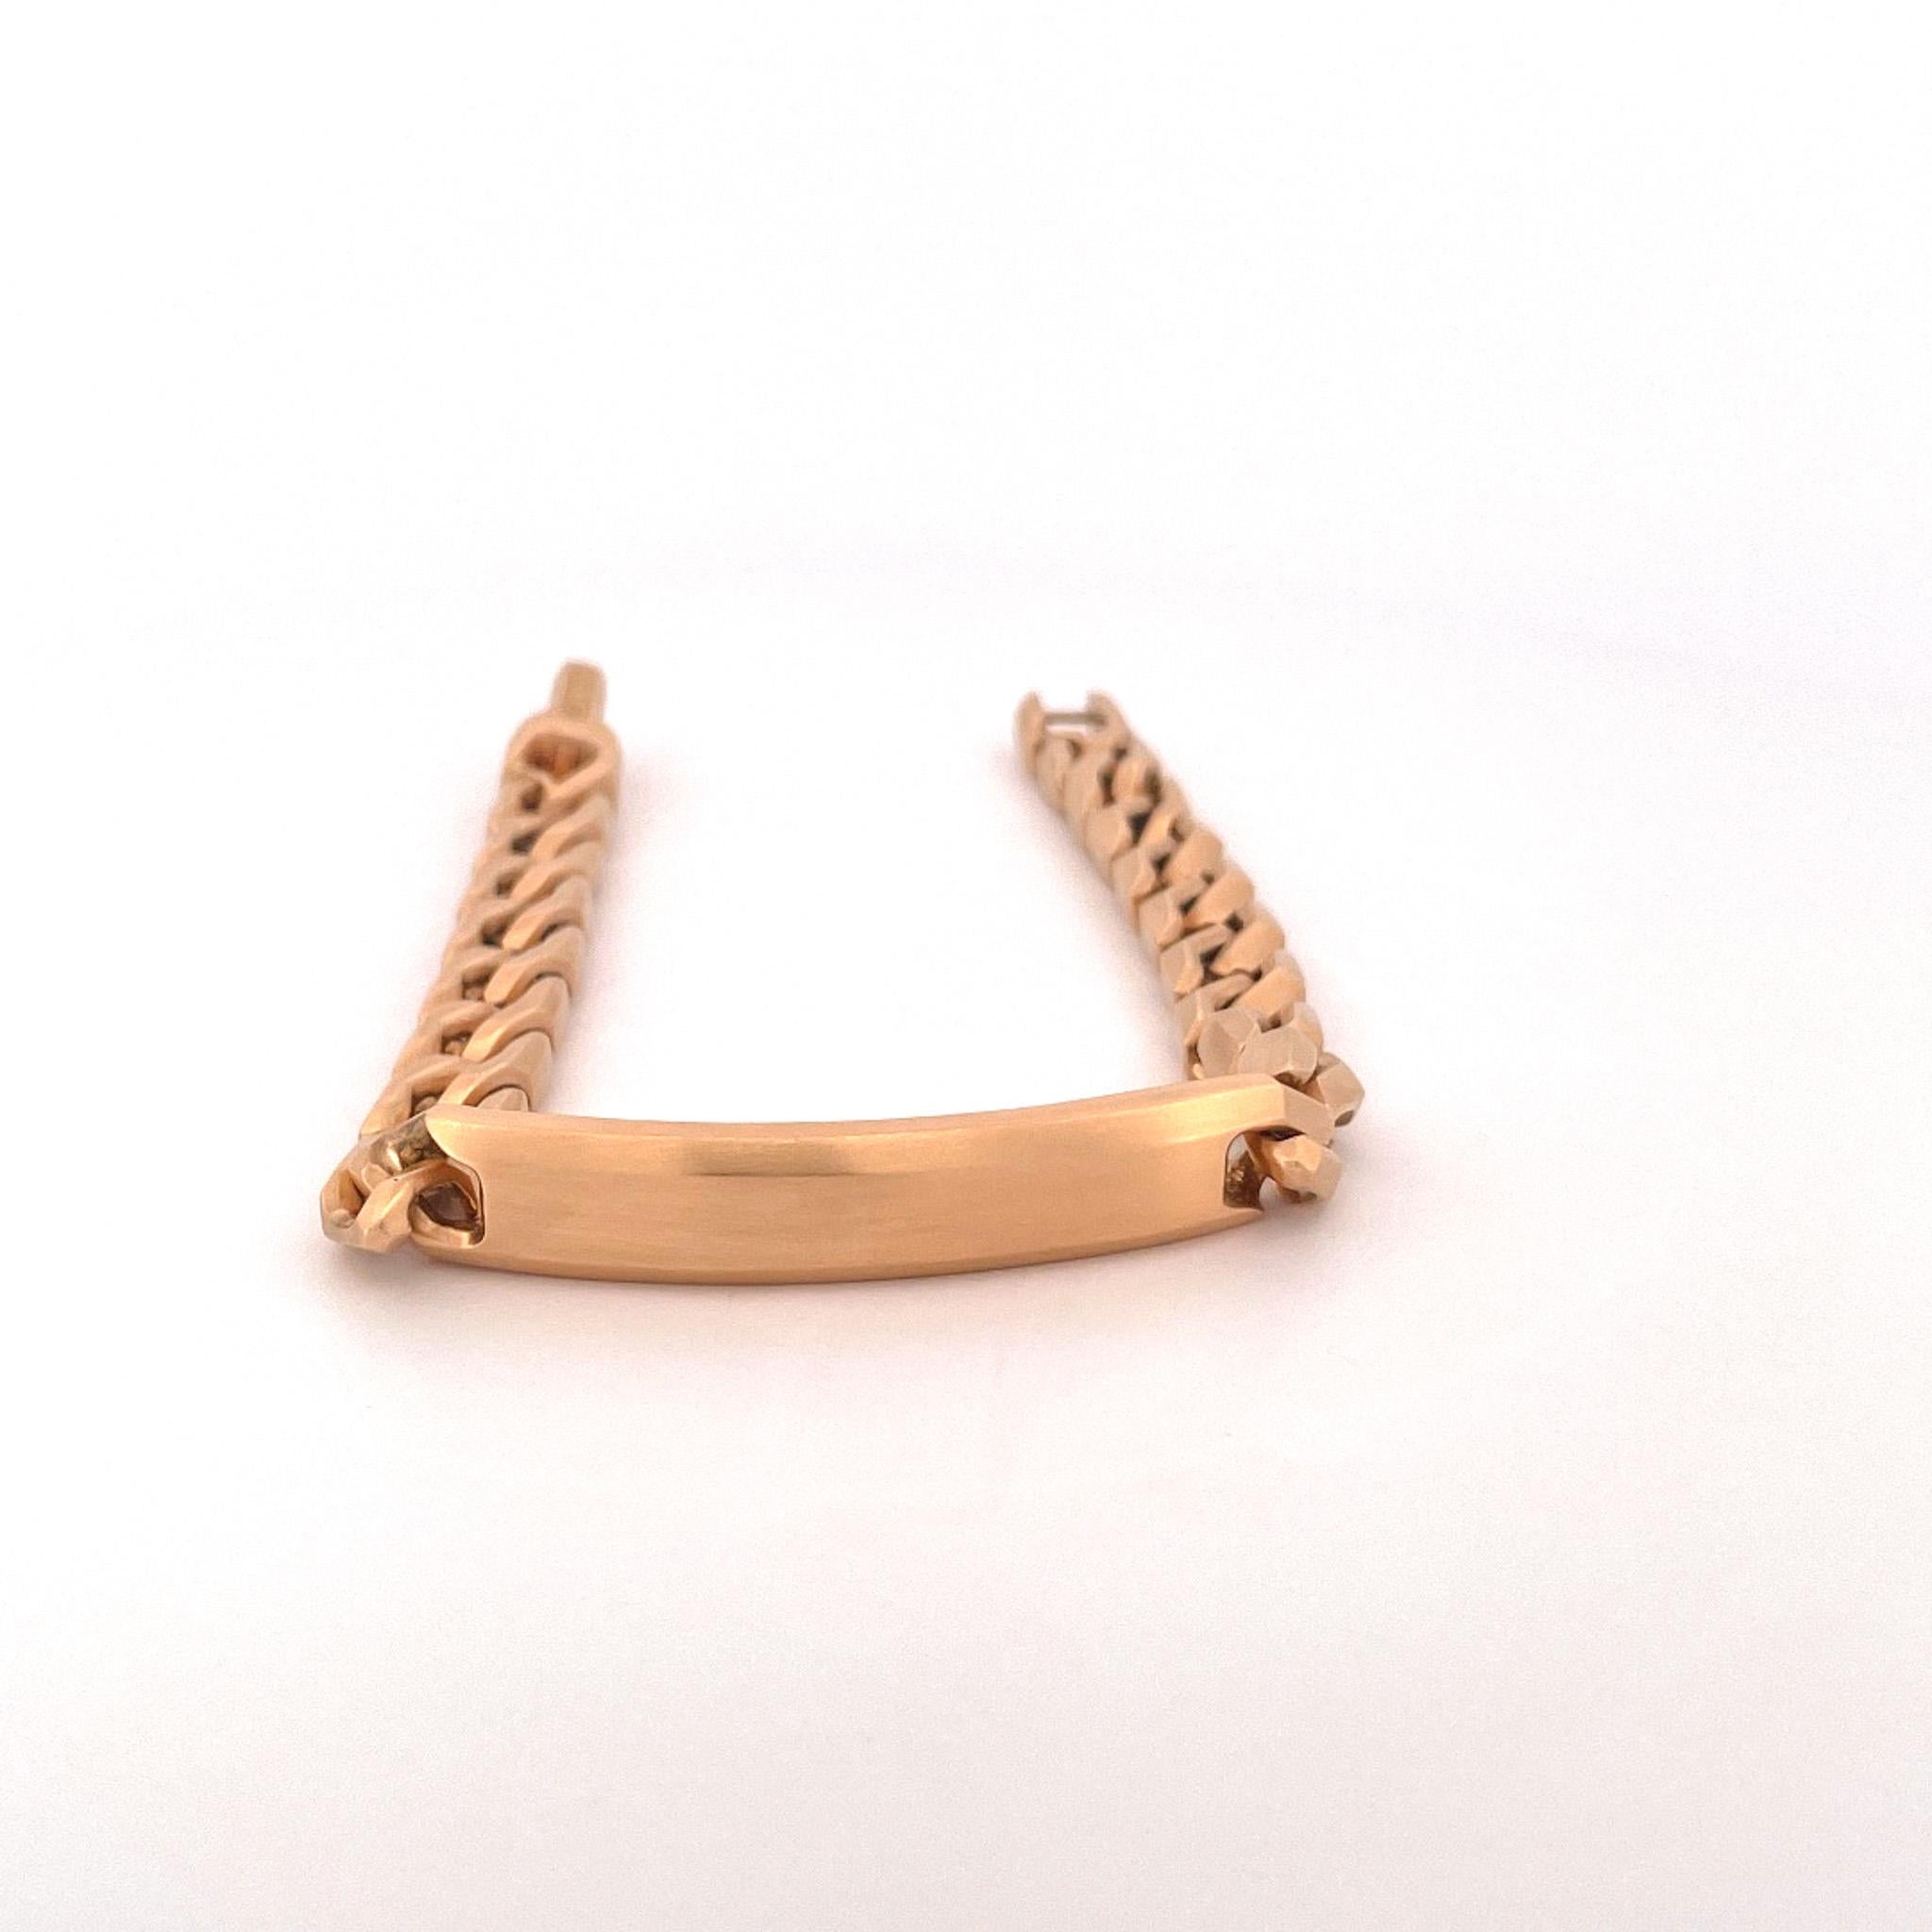 1990s David Yurman 18k Yellow Gold Name Plate Bracelet In Excellent Condition For Sale In Dallas, TX